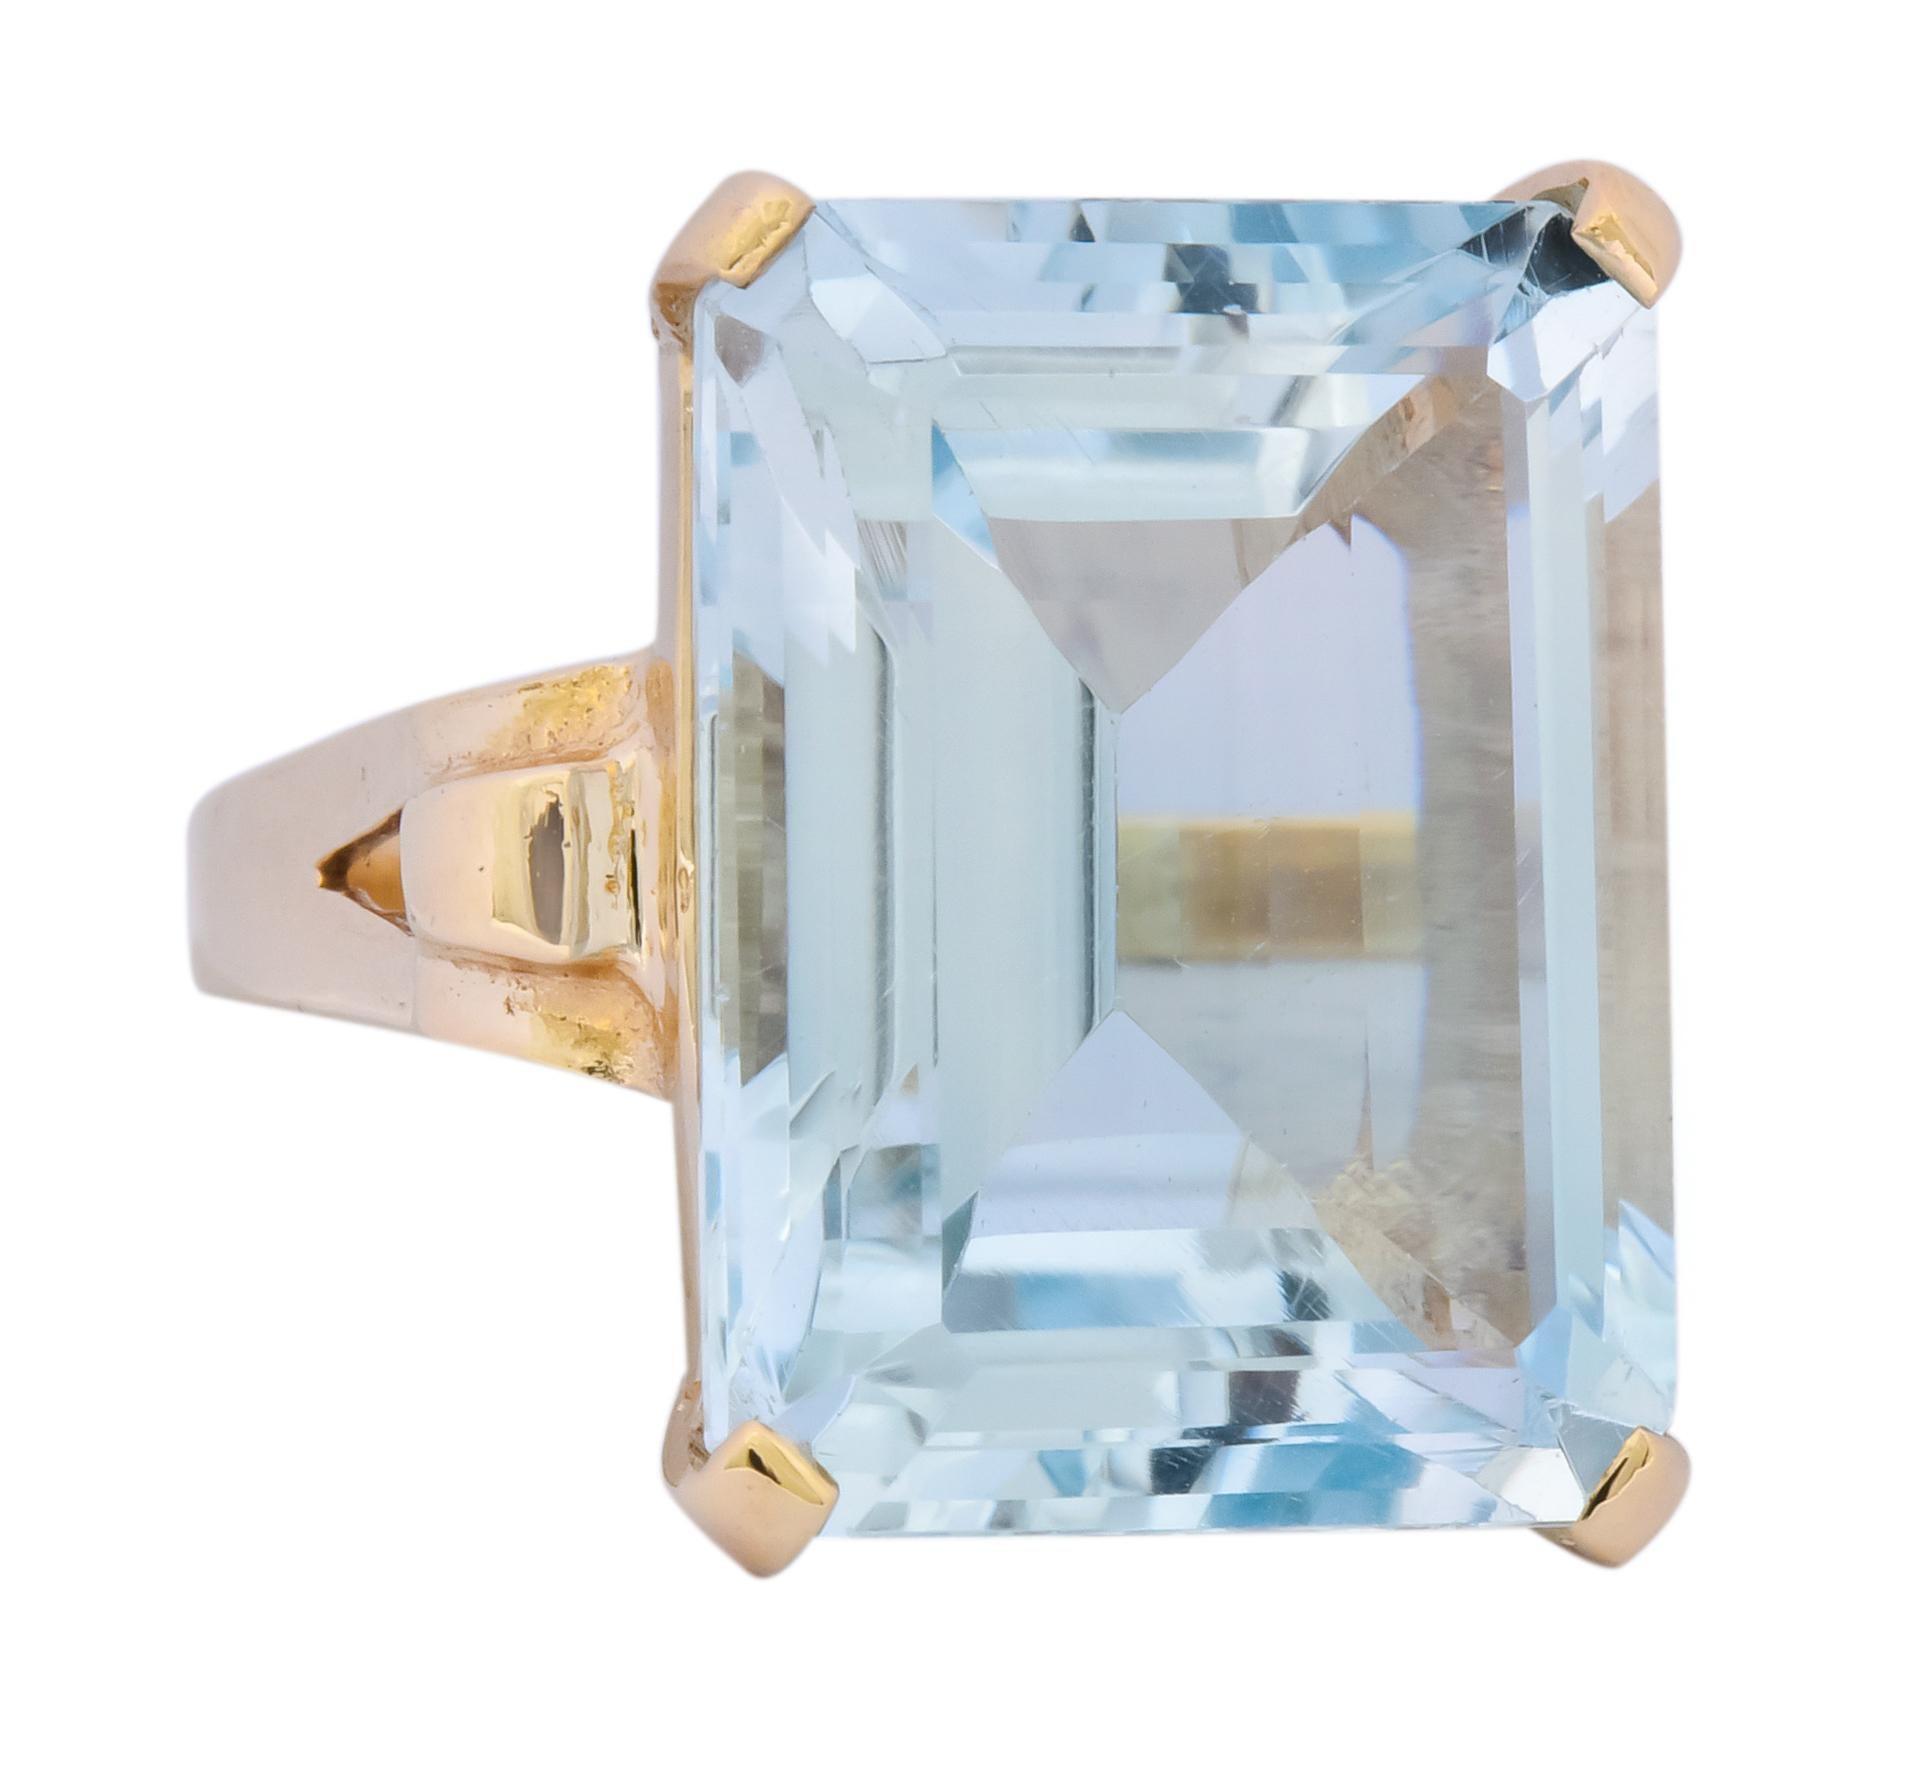 Centering a rectangular step cut aquamarine weighing approximately 18.00 carats, transparent and very light sky blue color

Prong set in a cathedral basket style mounting with domed, scrolled shoulders

Stamped 14k for 14 karat gold

Ring Size: 6